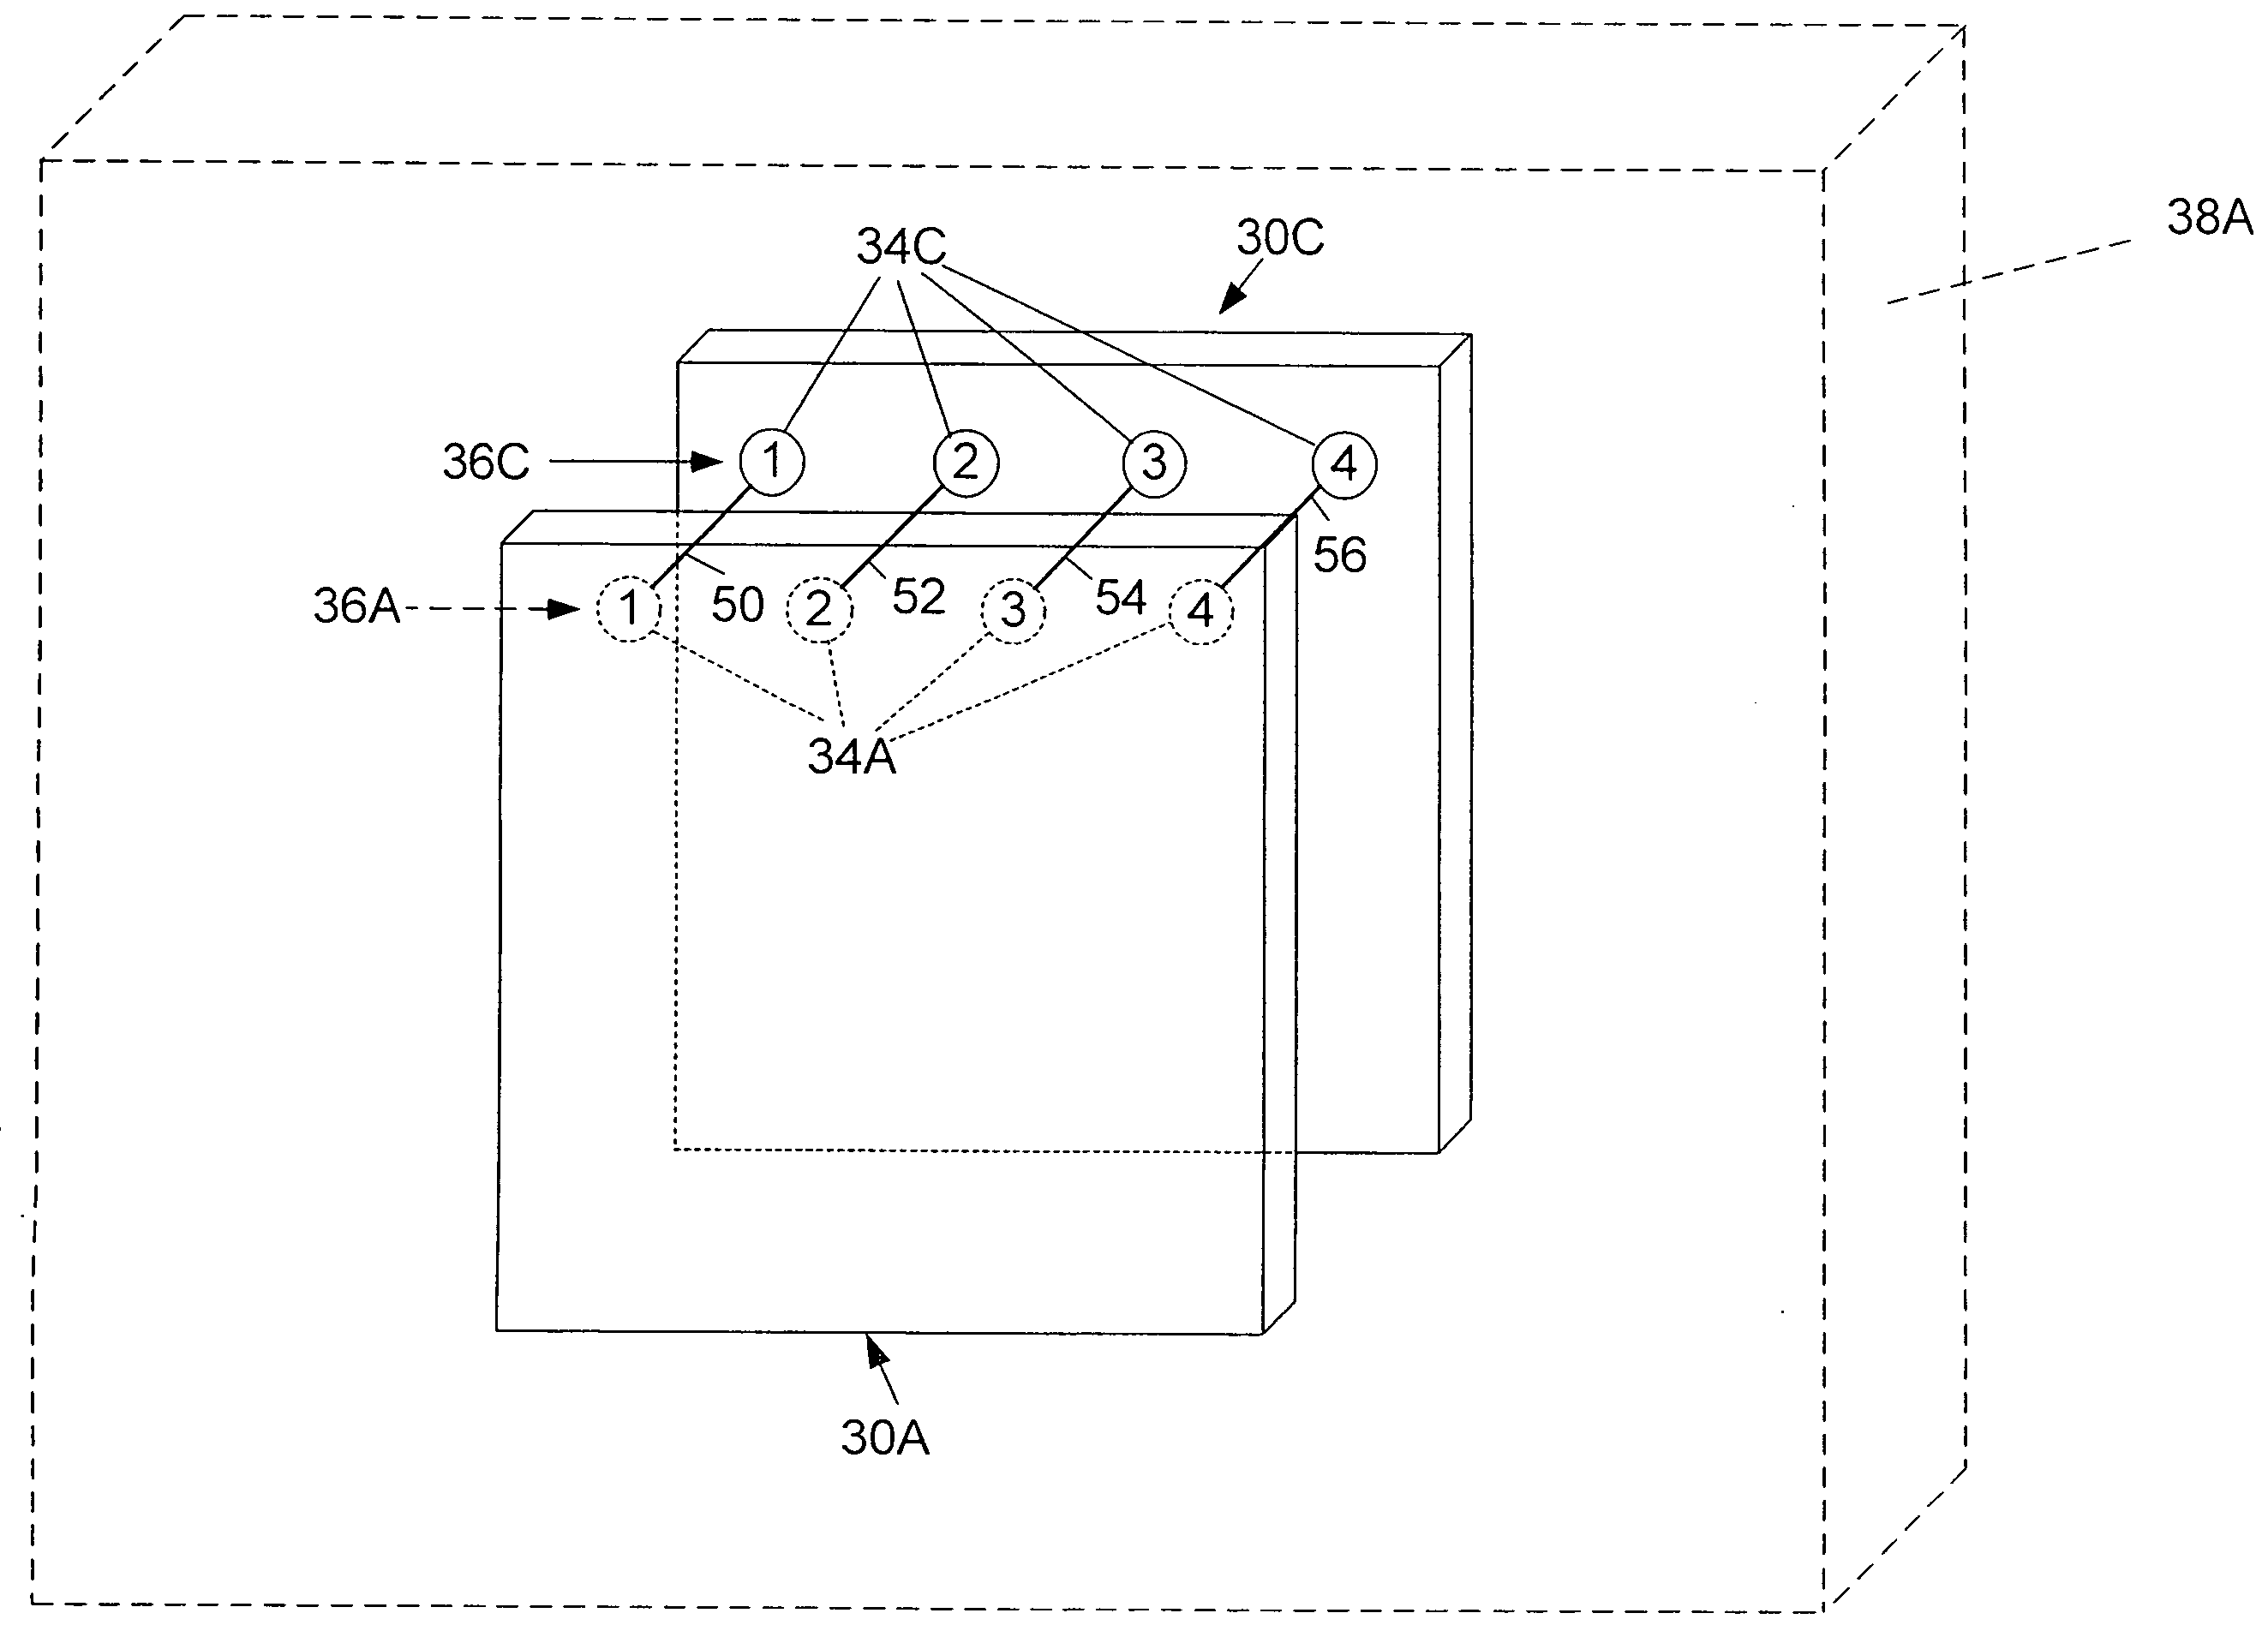 Connections for electronic devices on double-sided circuit board